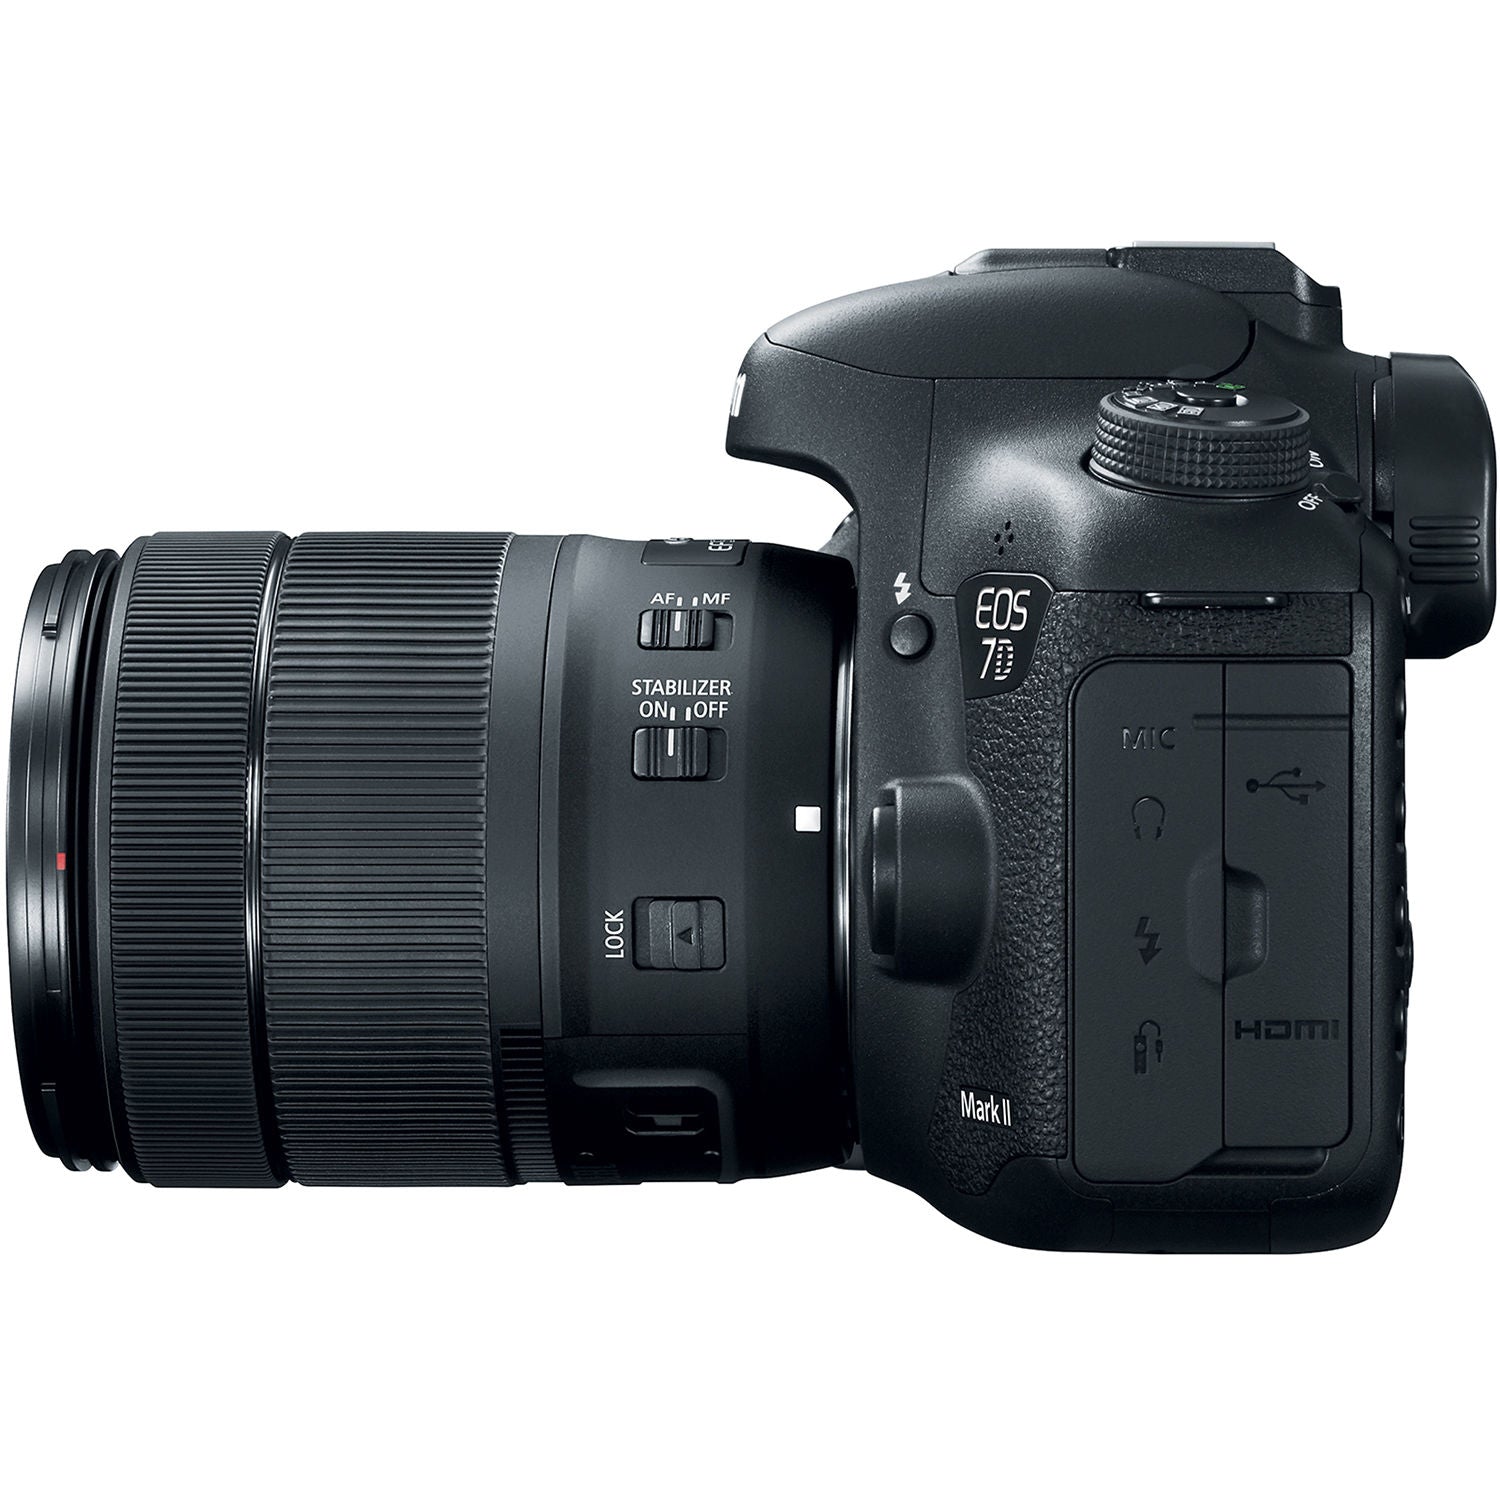 Canon EOS 7D Mark II DSLR Camera (Intl Model) with 18-135mm Lens & W-E1 Wi-Fi Adapter With Filter Kit and Cleaning Kit